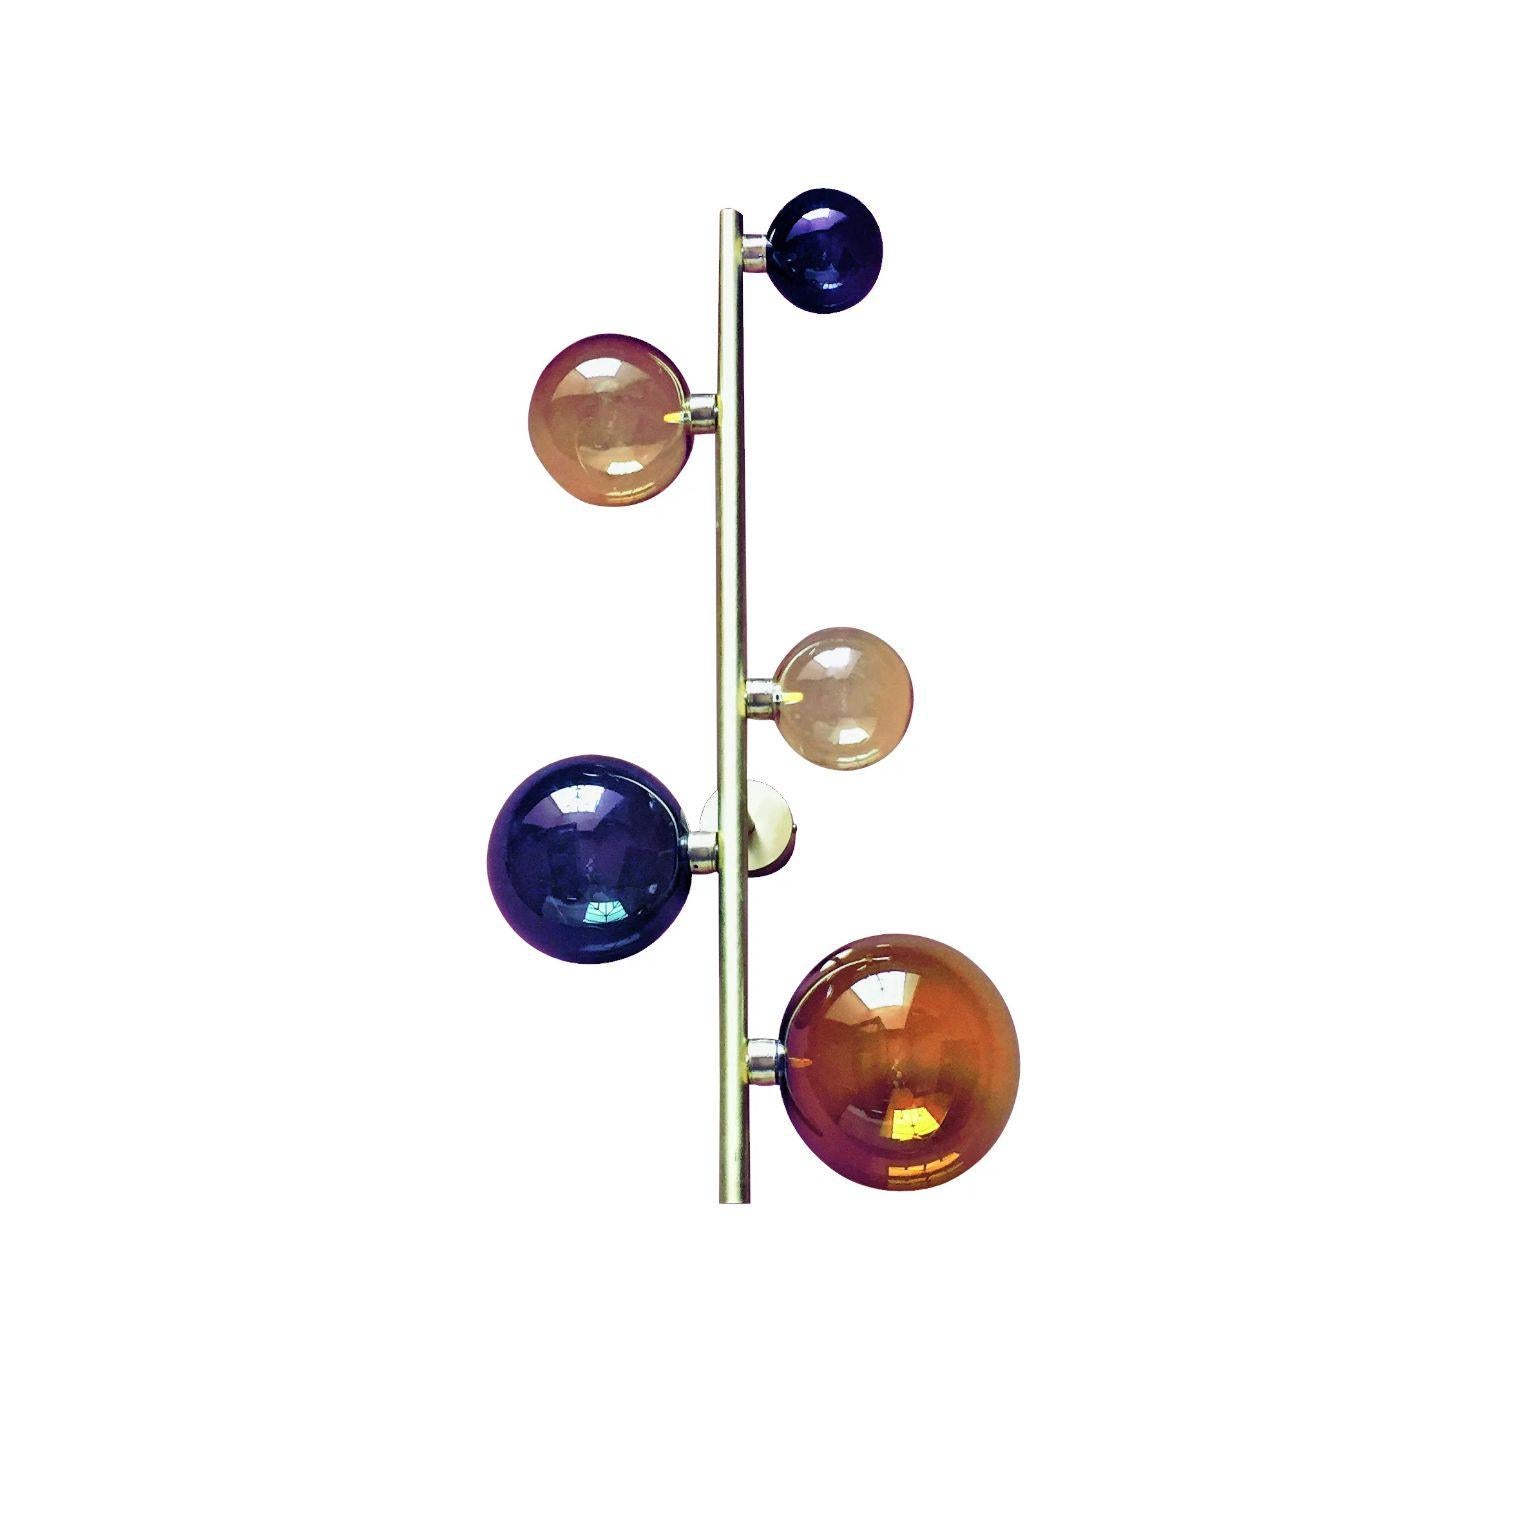 Cosmos sconce #5 by Emilie Lemardeley
Dimensions: D19 x W37 x H70 cm
Materials: brushed brass, 5 glass spheres
Weight: 4 kg

The cosmos collection references to the old occidental belief that the Earth was the center of the universe. During all